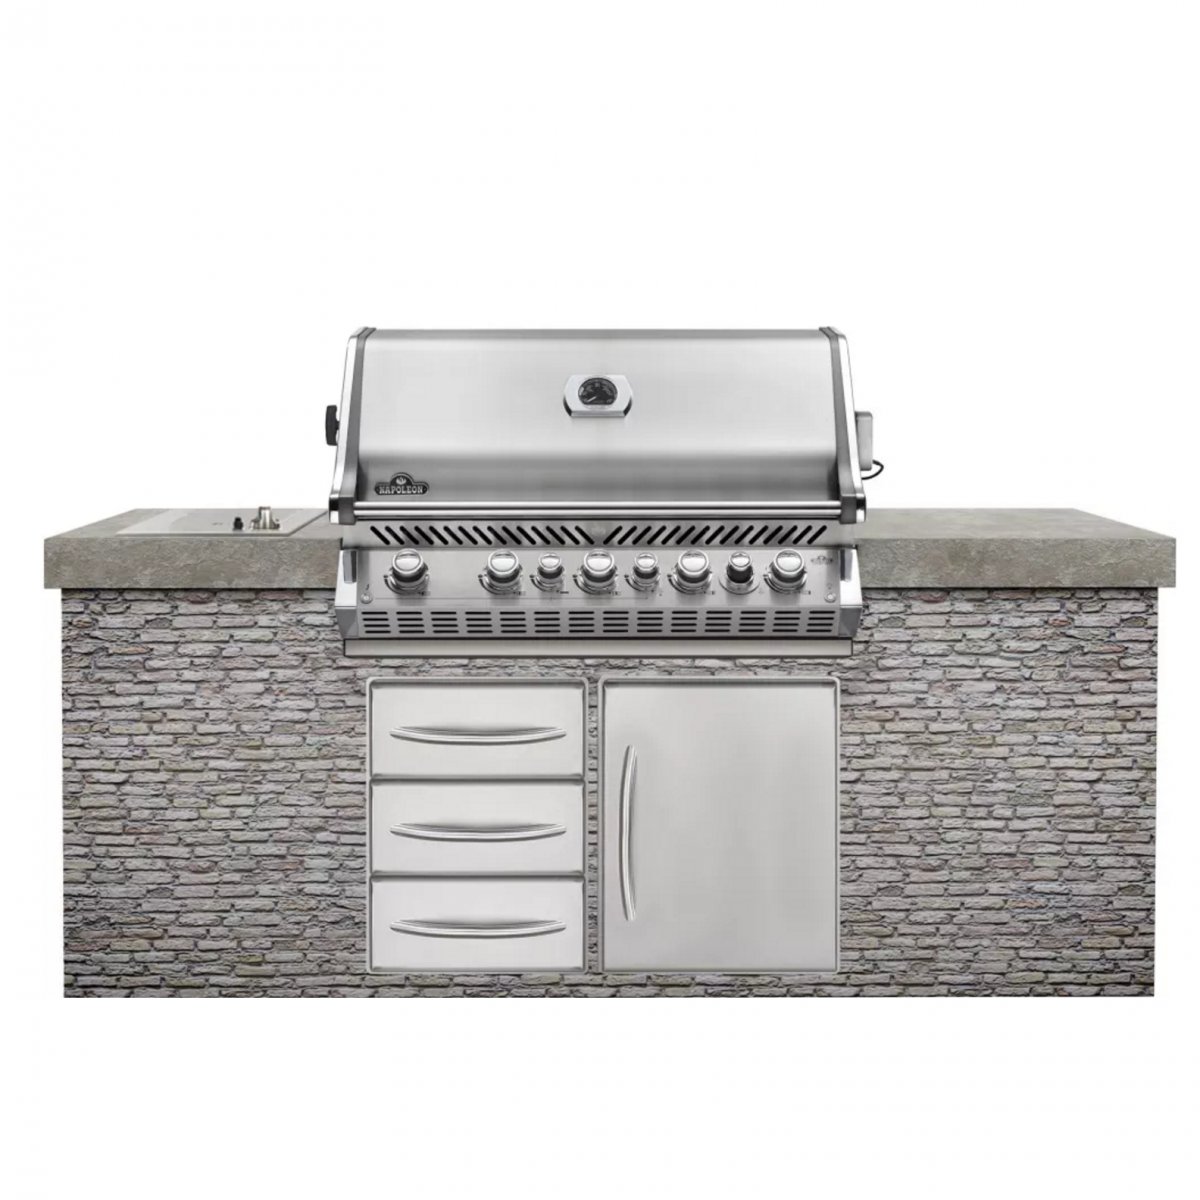 Napoleon Grills BARBECUE A GAS INCASSO BIPRO665RB